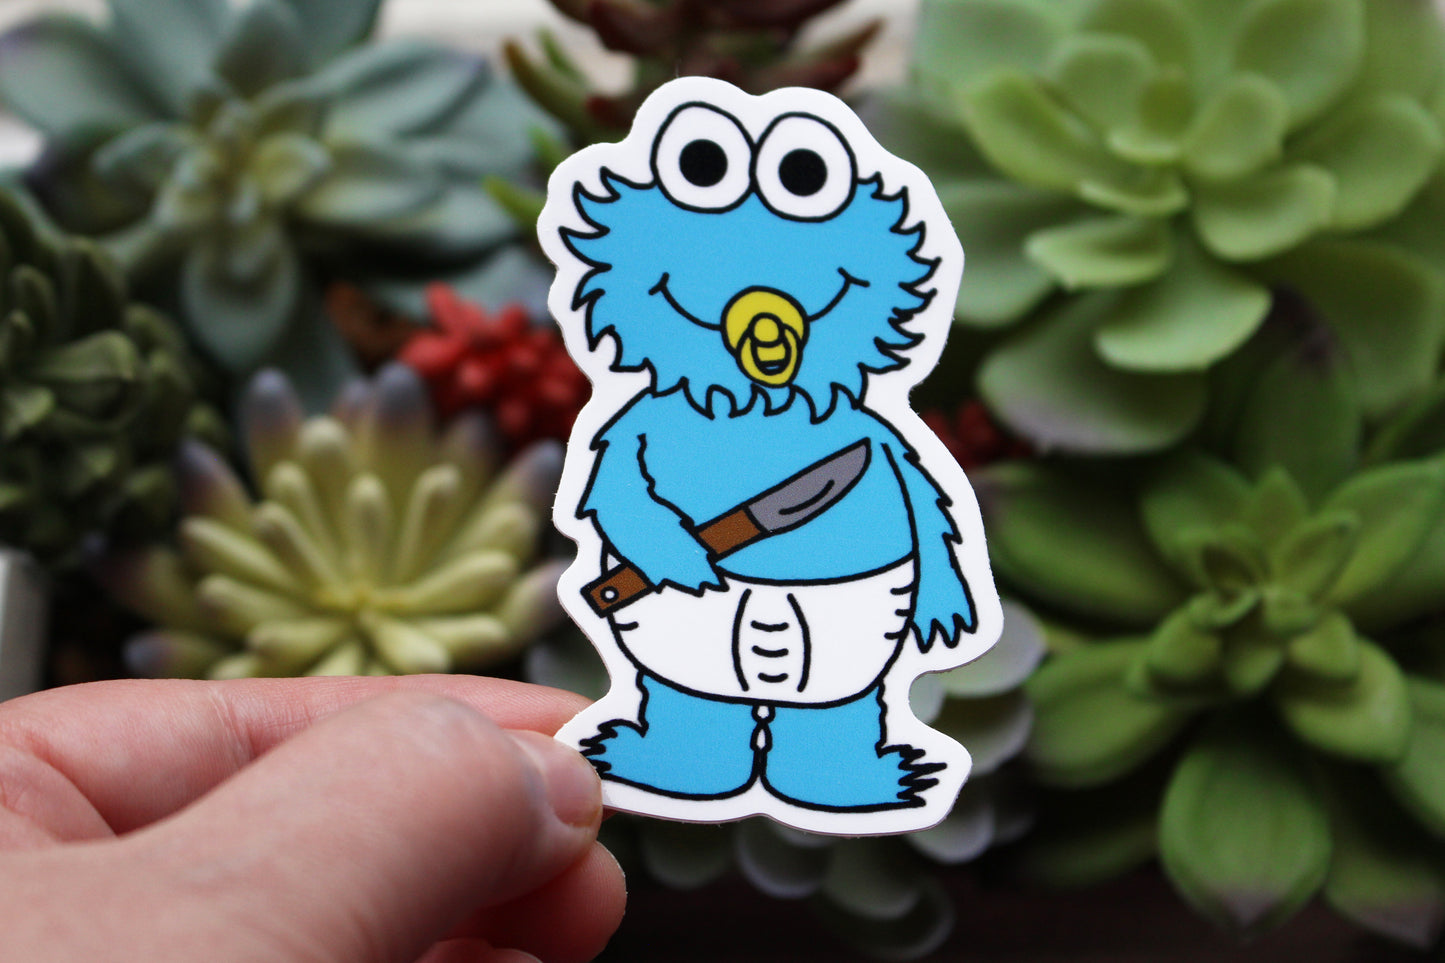 Baby cookie monster wearing a diaper holding a knife sucking a pacifier horror parody sticker by SpookyKillerBabies.com